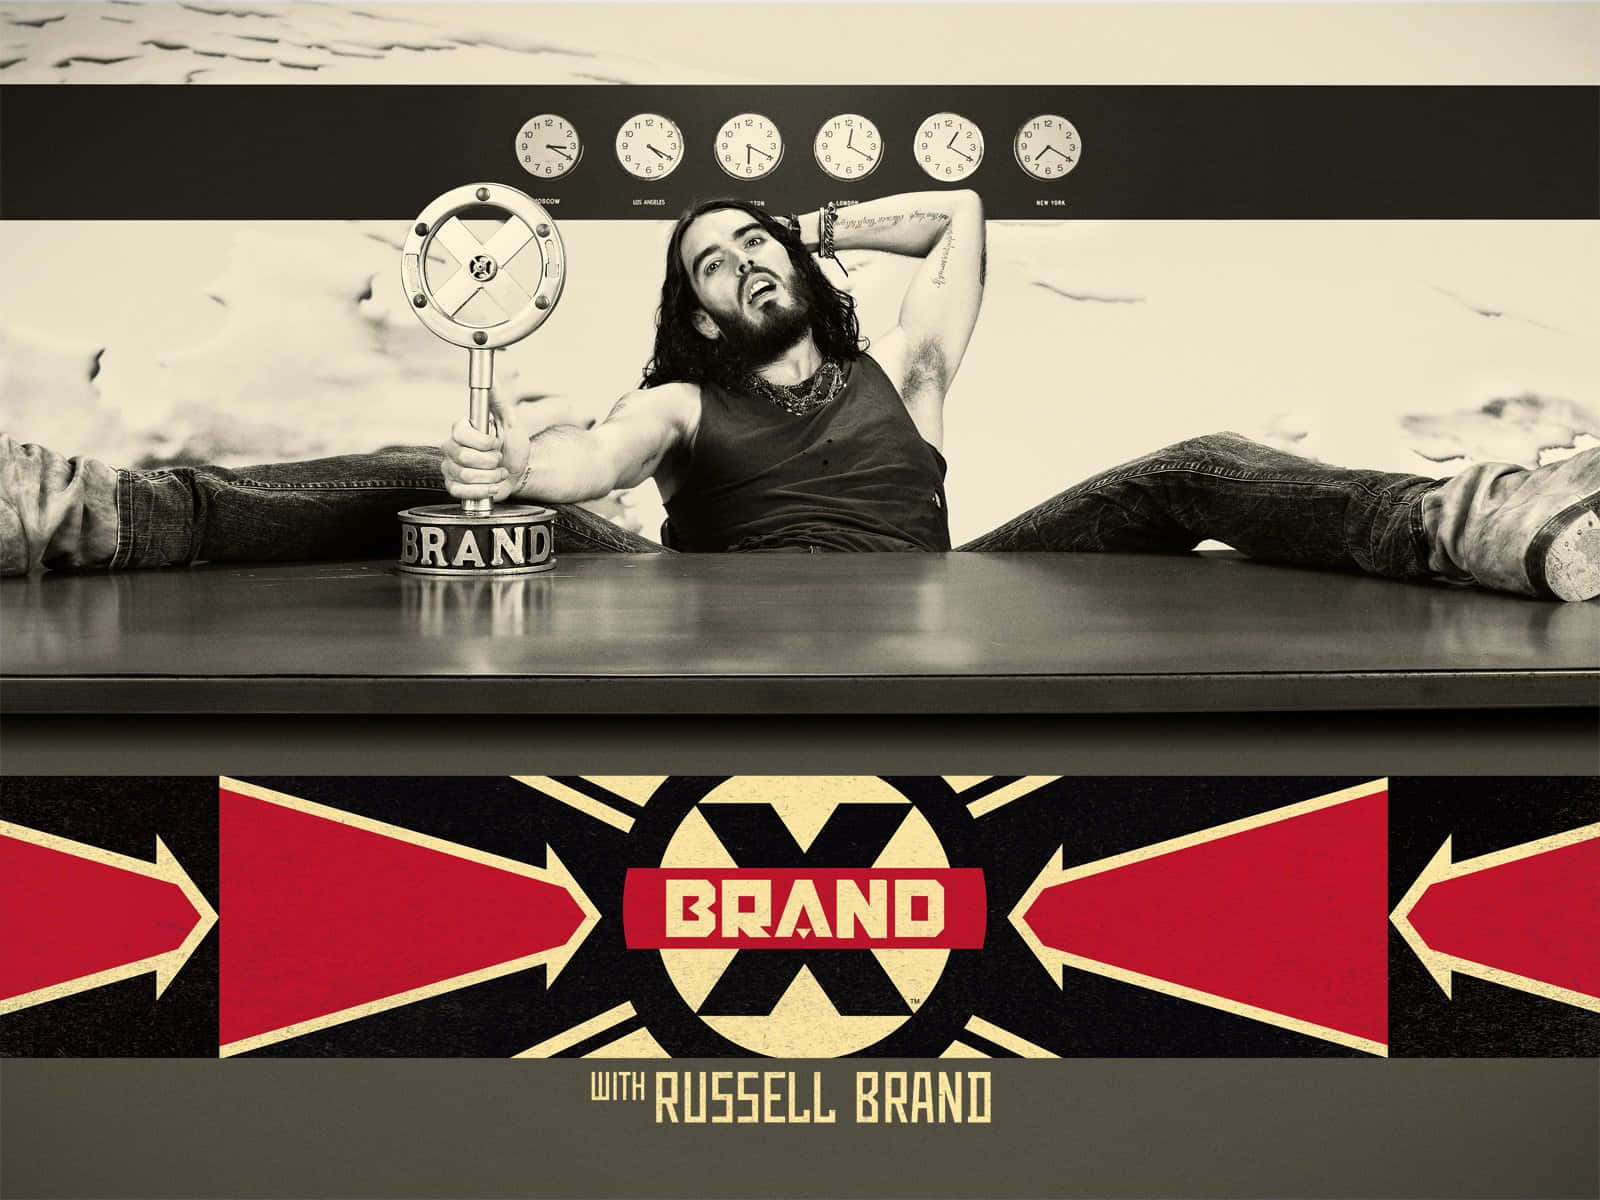 Russellbrand Brand X Show In German Would Be 